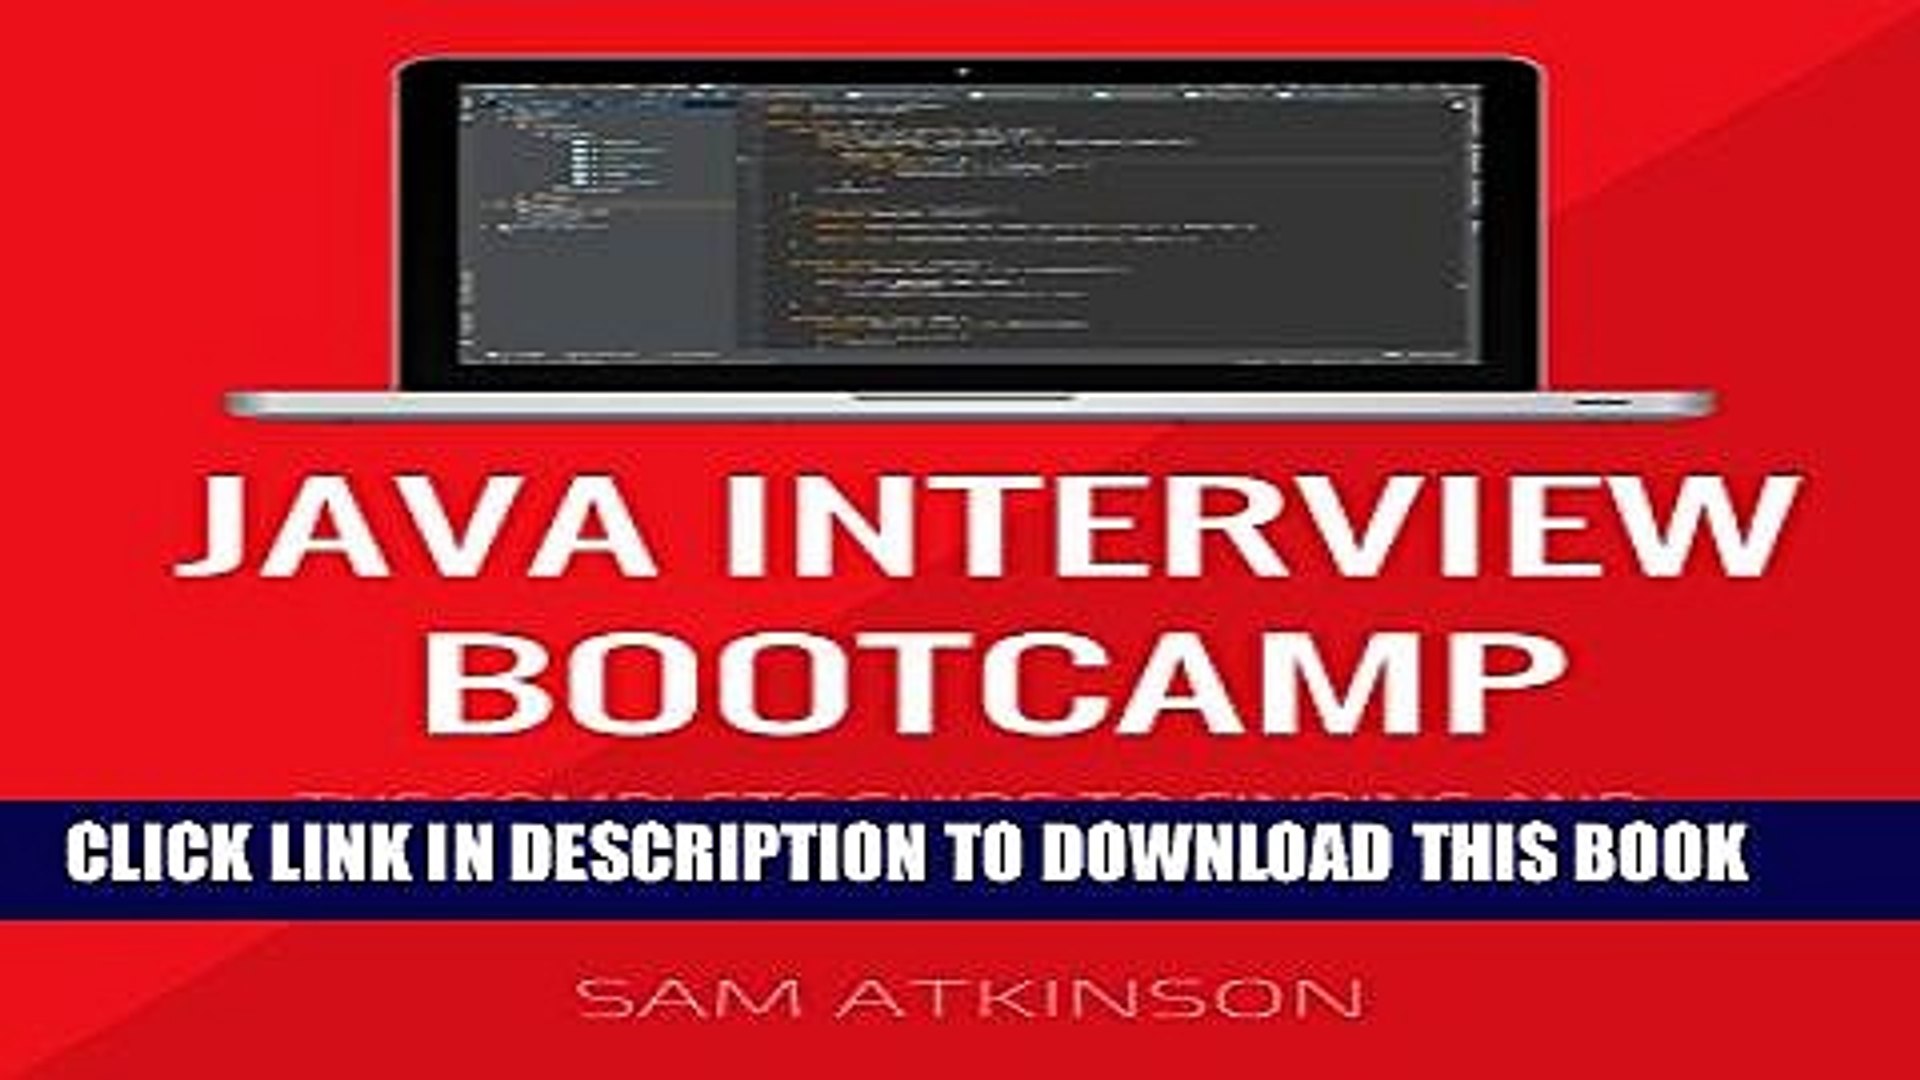 [PDF] Java Interview Bootcamp: The Complete Guide To Finding And Landing Your Next Java Developer